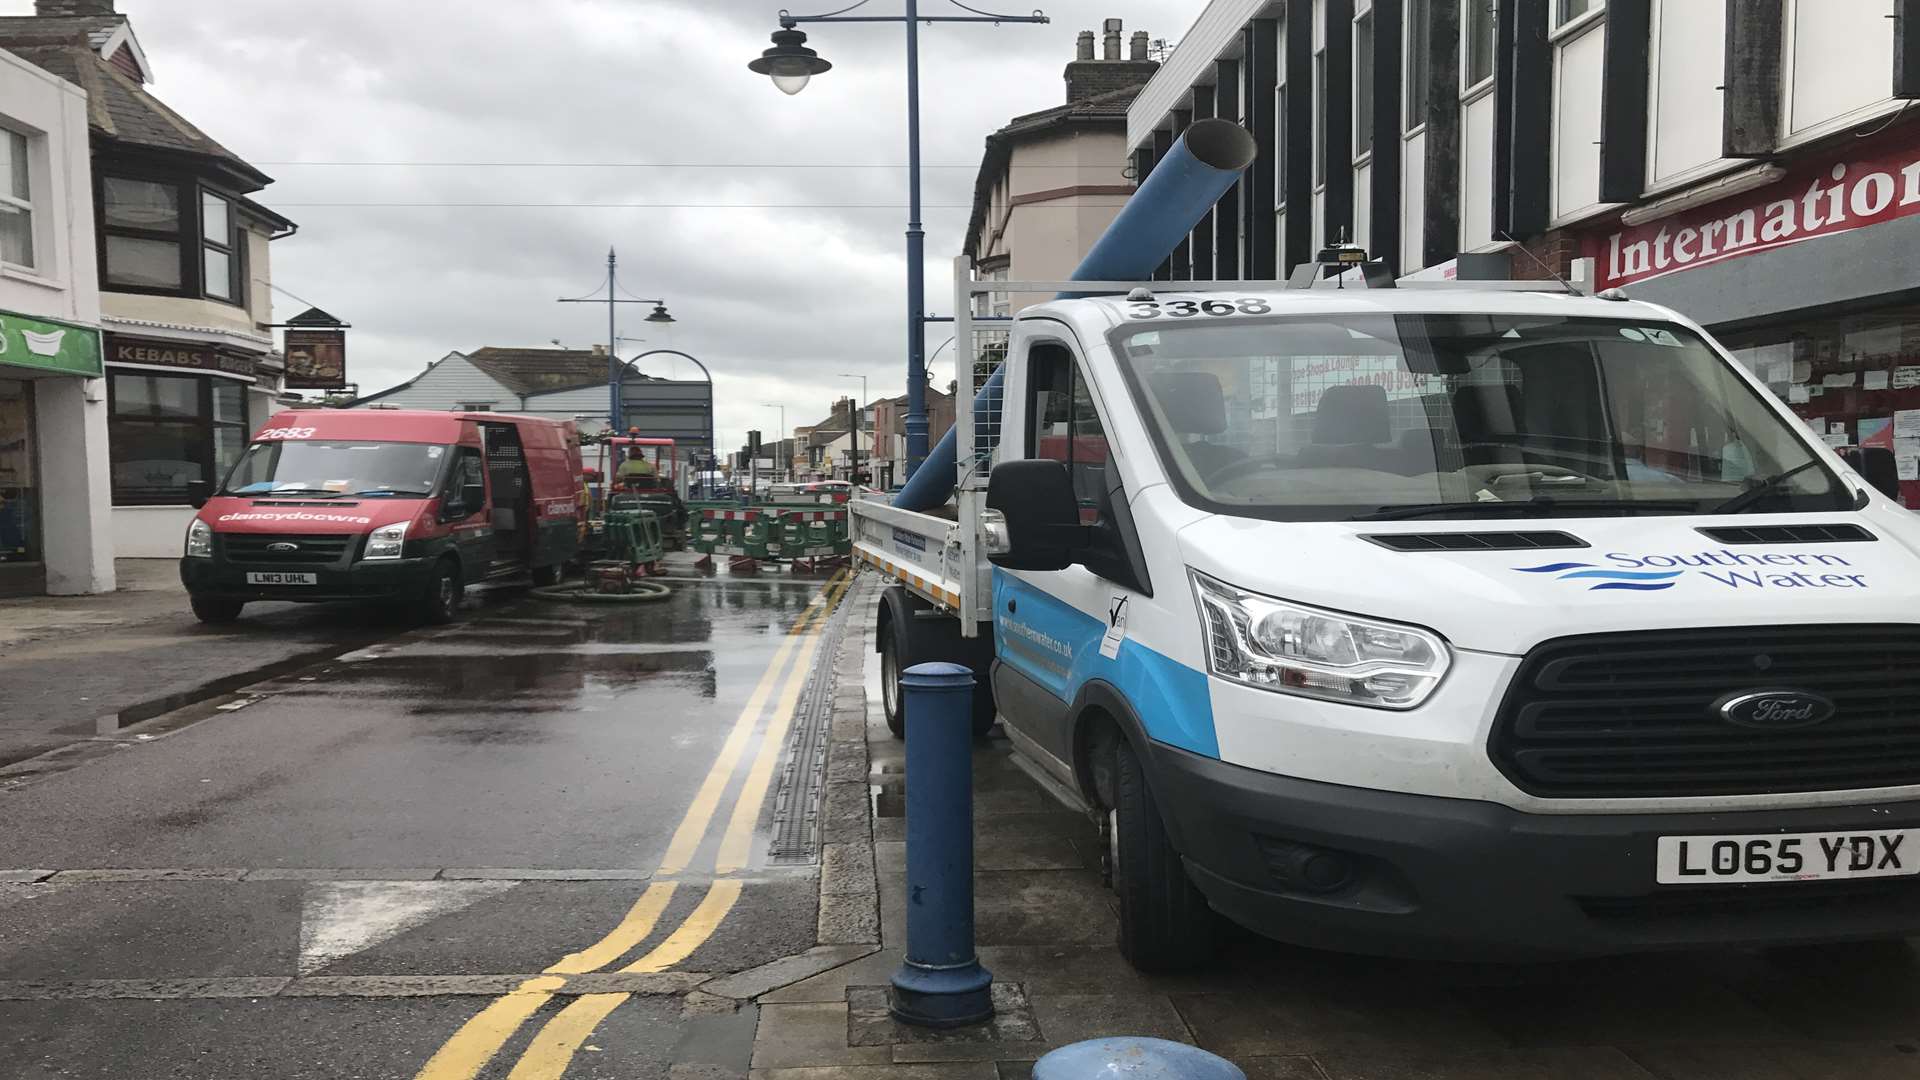 Sheerness High Street had to be shut after a burst water main